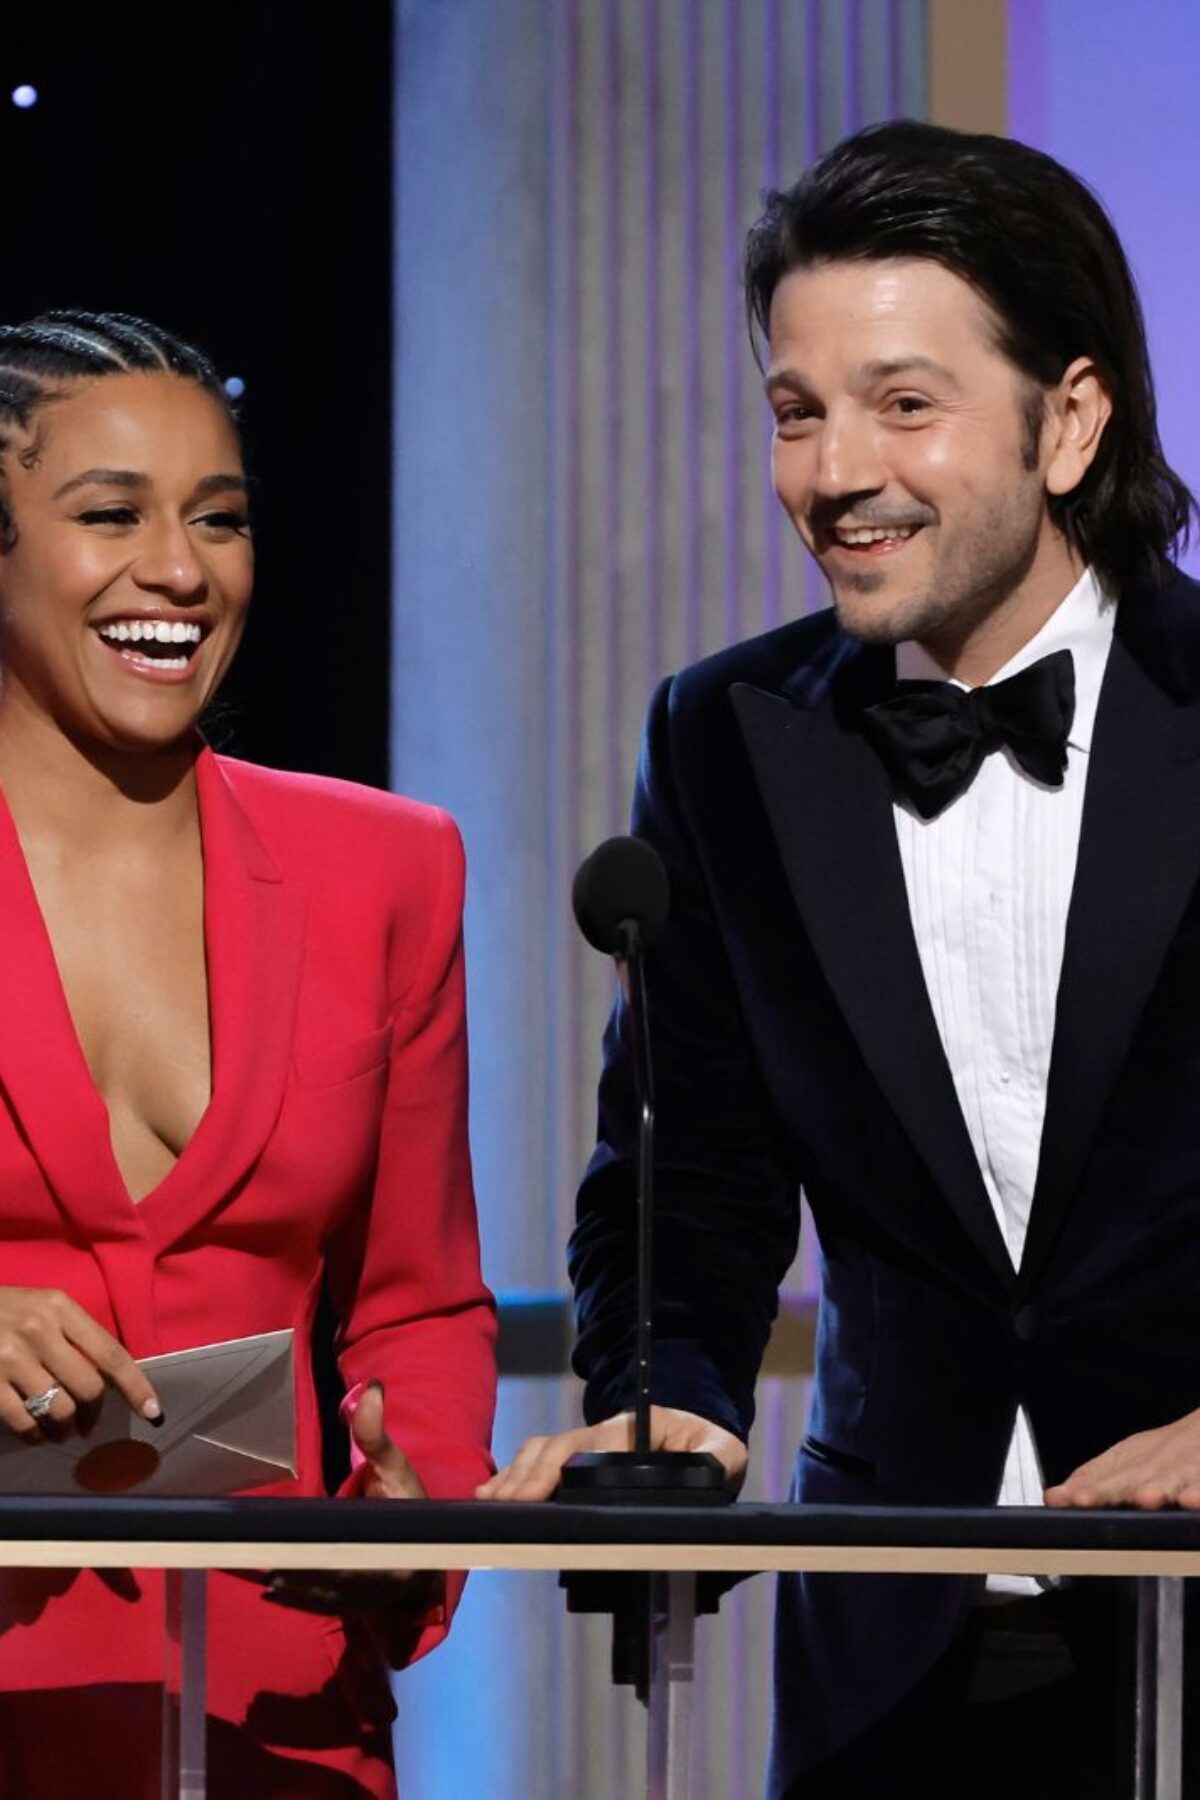 LOS ANGELES, CALIFORNIA - FEBRUARY 26: (L-R) Ariana DeBose and Diego Luna speak onstage during the 29th Annual Screen Actors Guild Awards at Fairmont Century Plaza on February 26, 2023 in Los Angeles, California. (Photo by Kevin Winter/Getty Images)